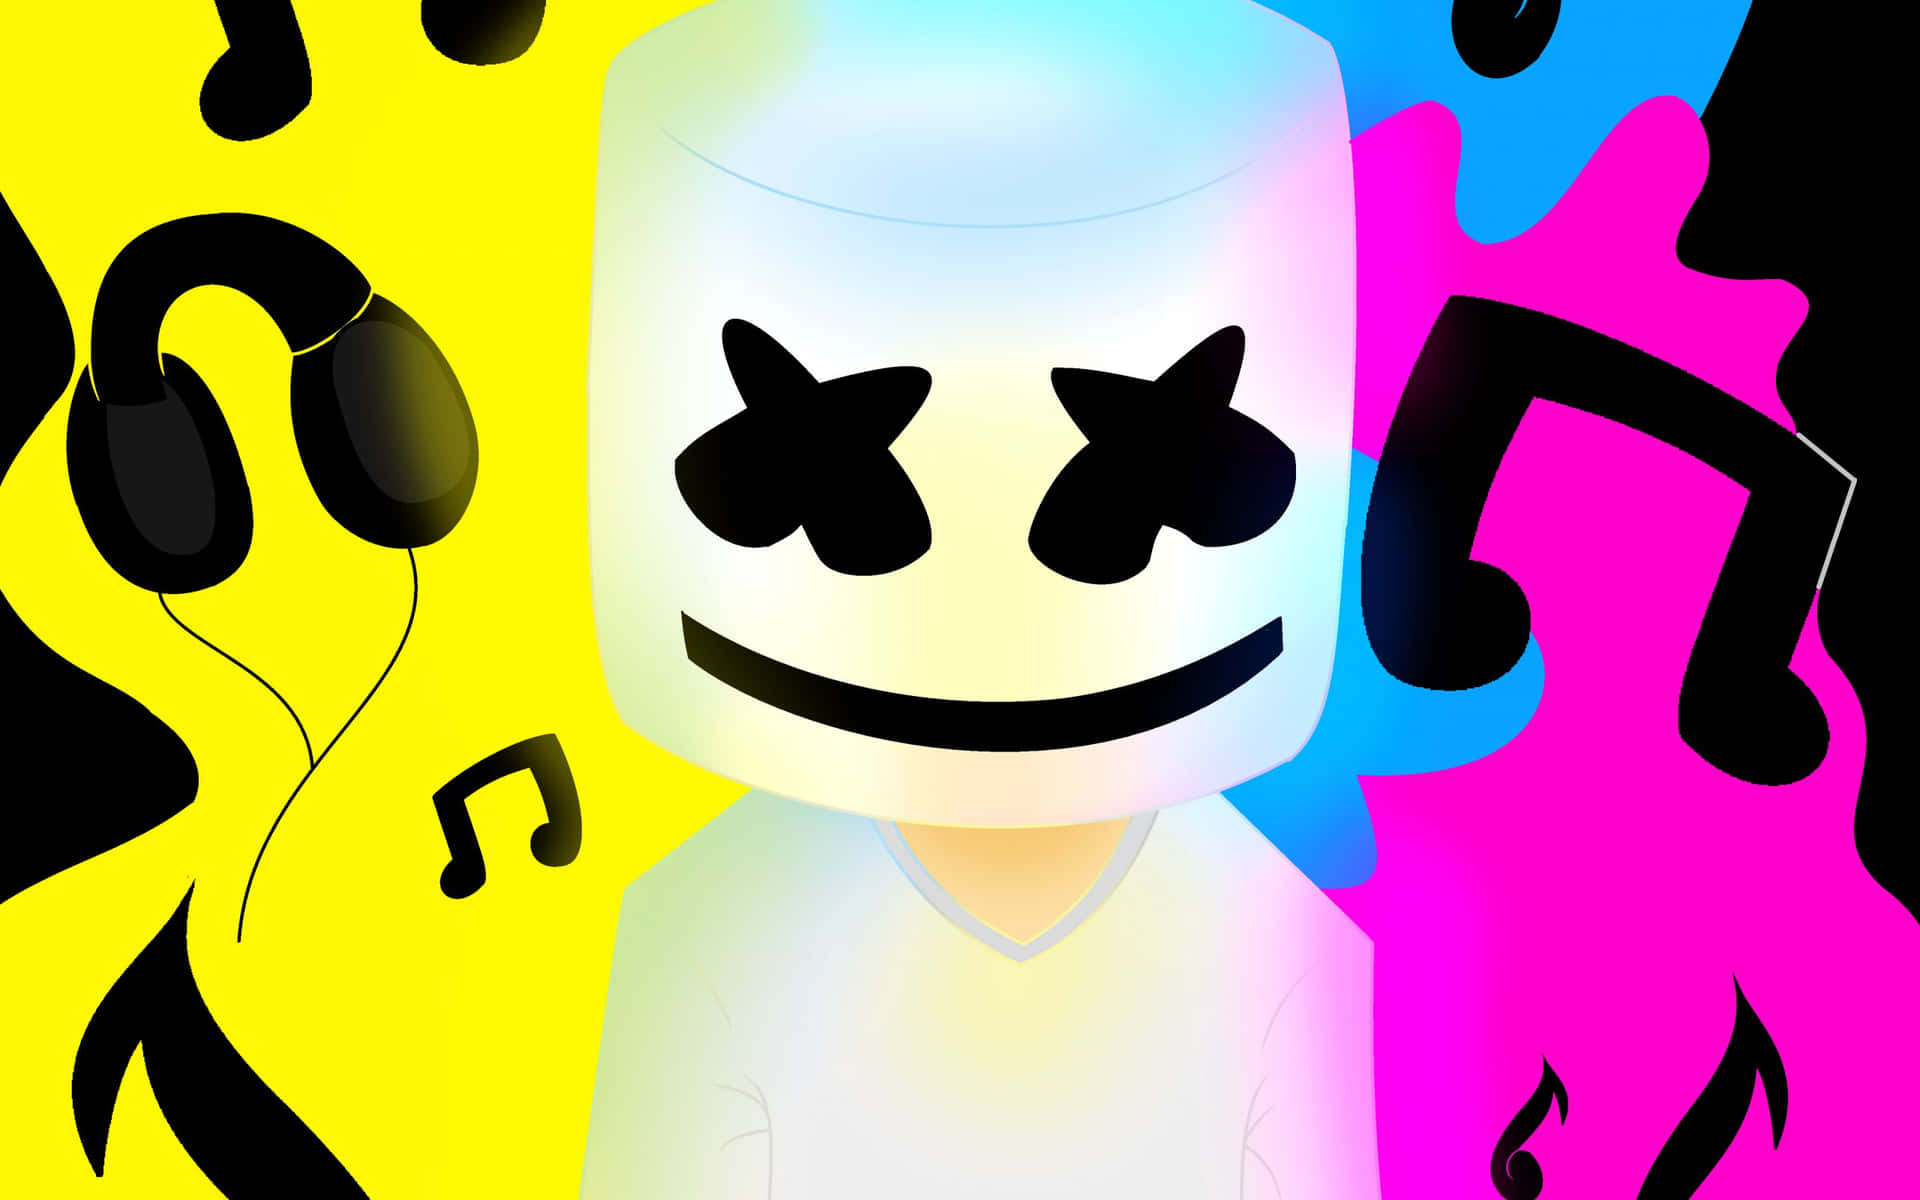 Brighten Up Your Day with Marshmello